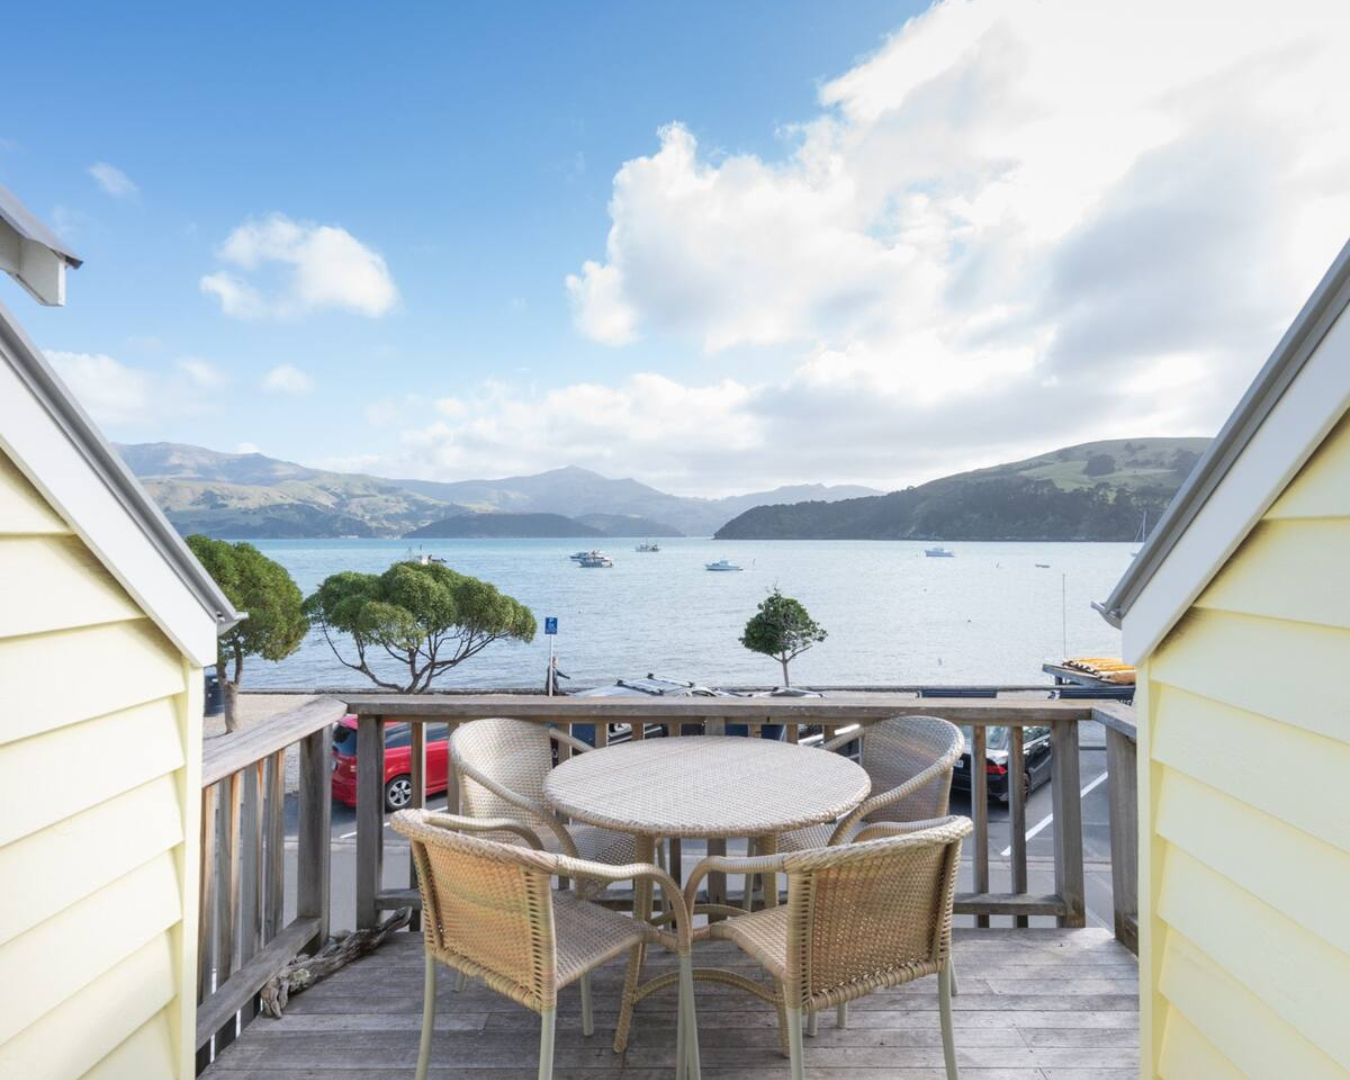 The balcony of this Akaroa stay looks out over the tranquil waters